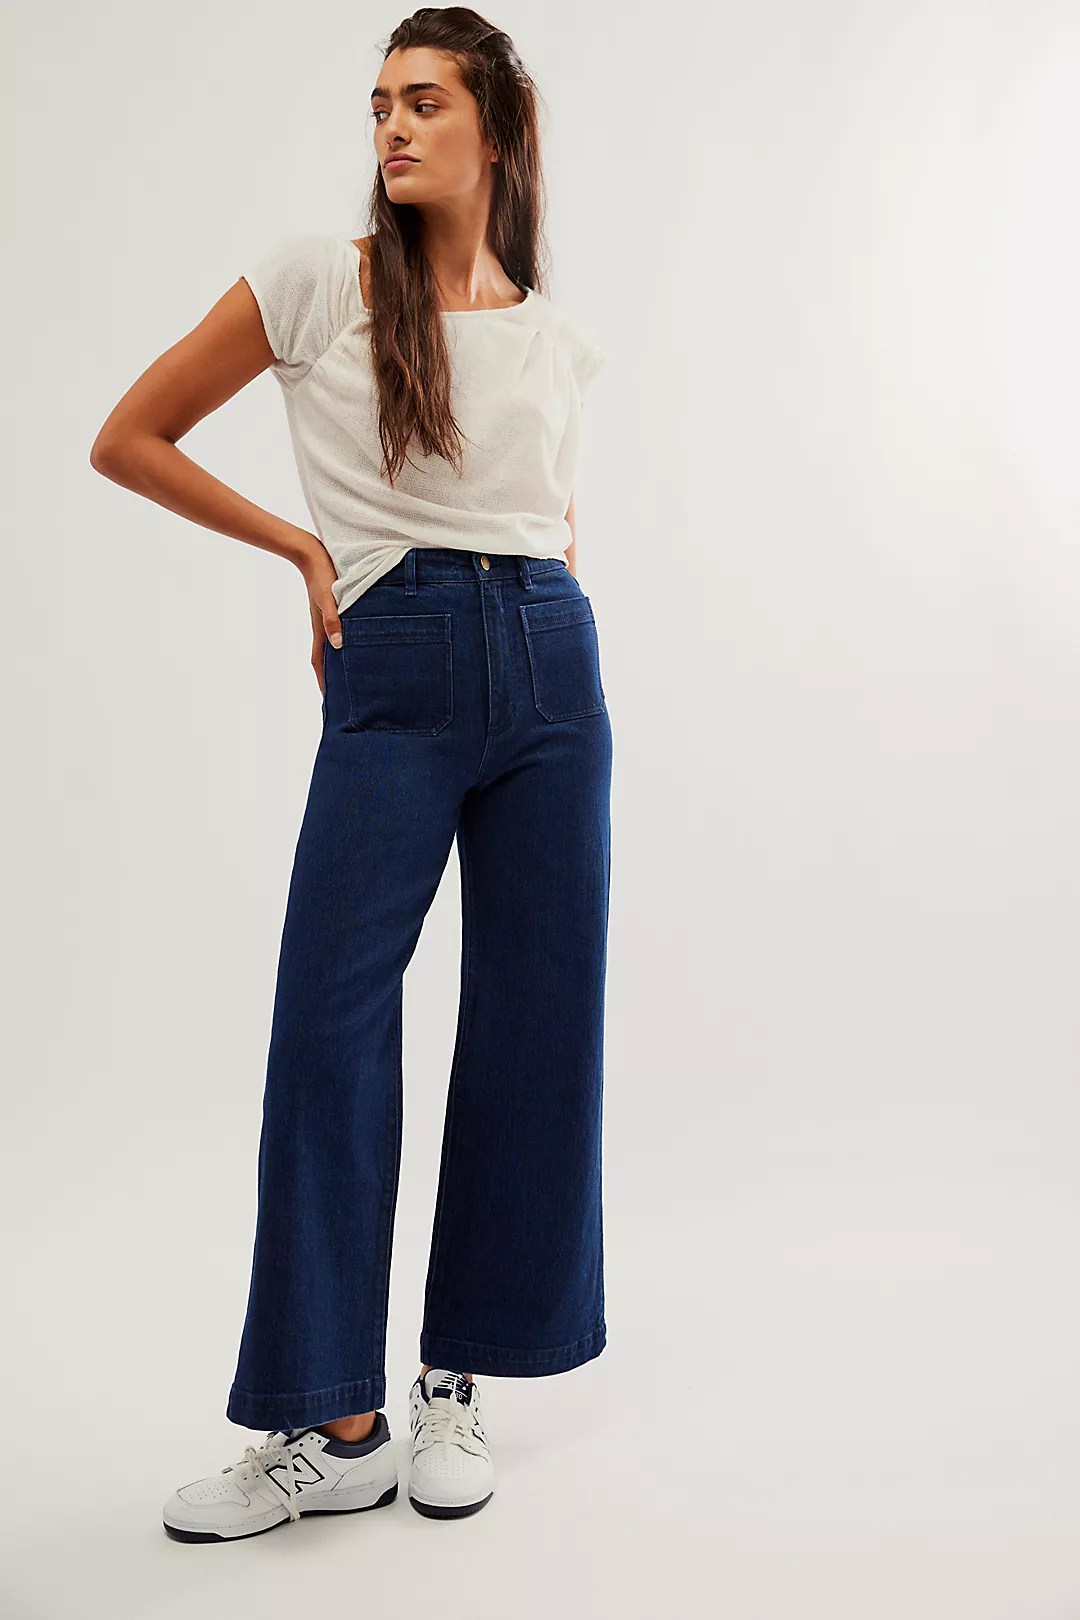 The 9 Best Sailor Pants for Women in 2023 | Well+Good